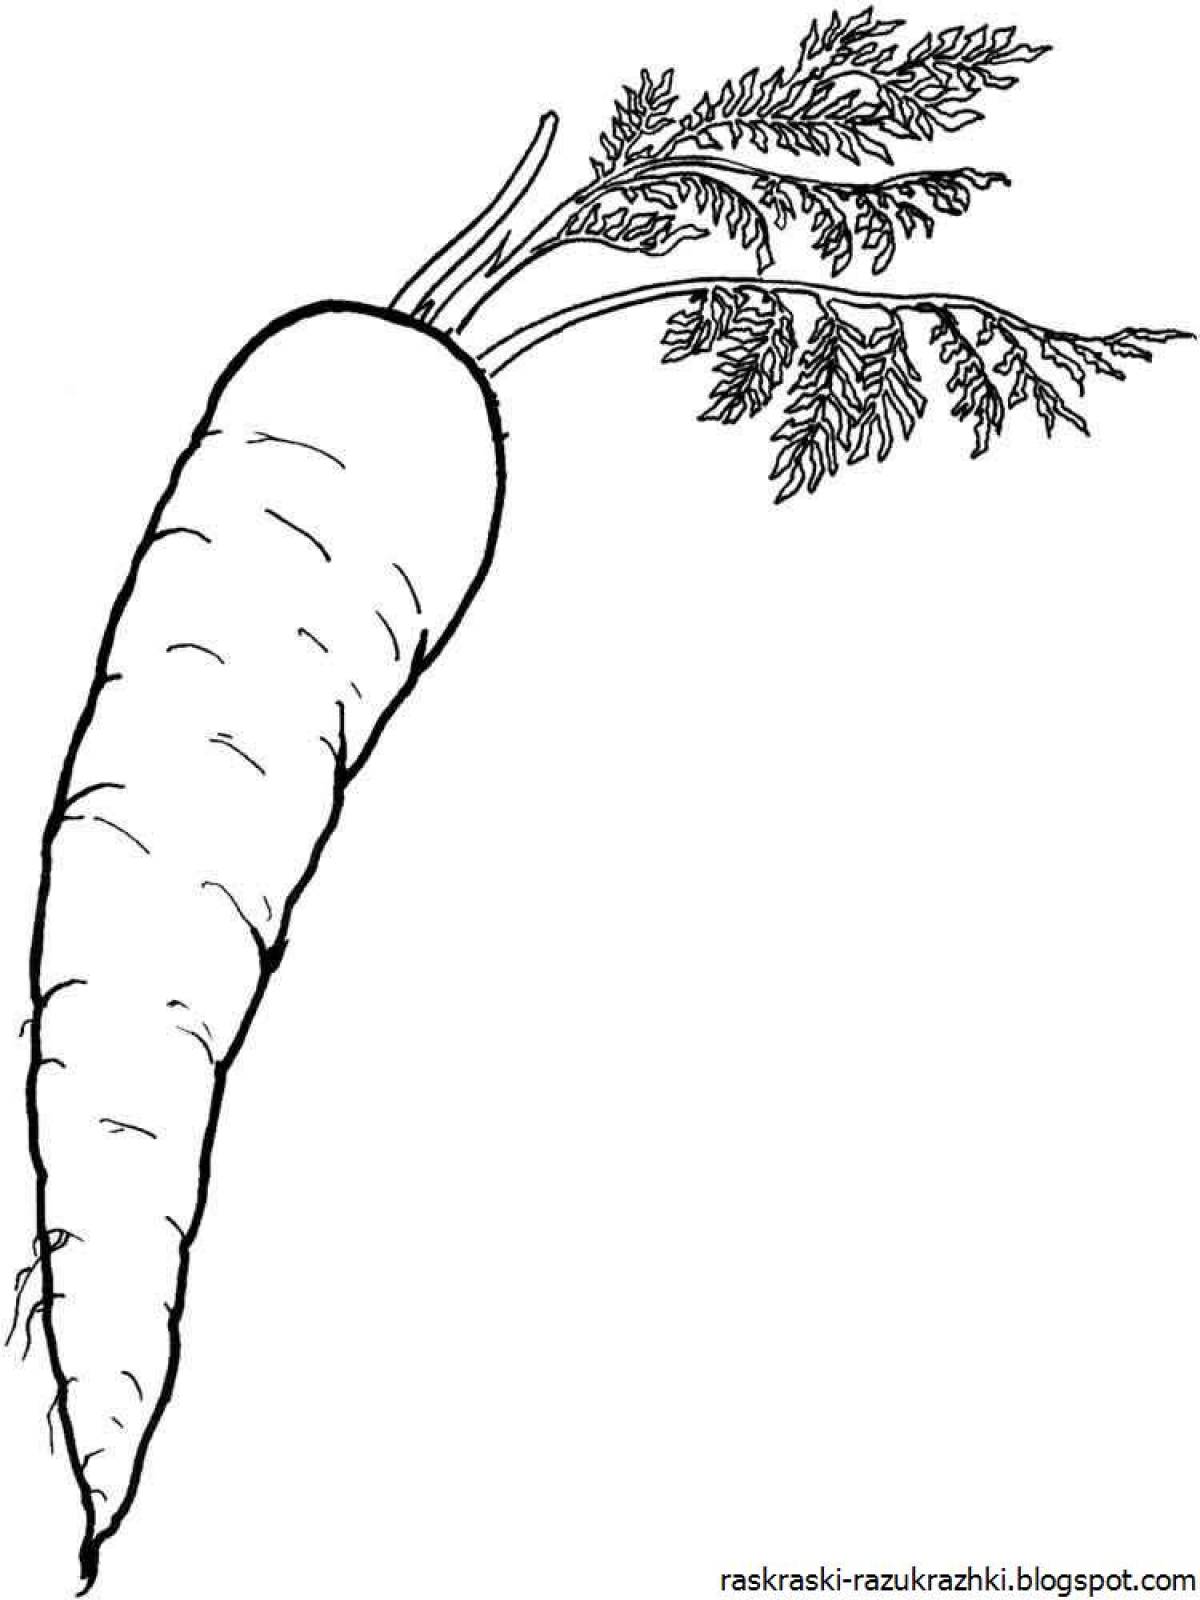 Funny carrot coloring book